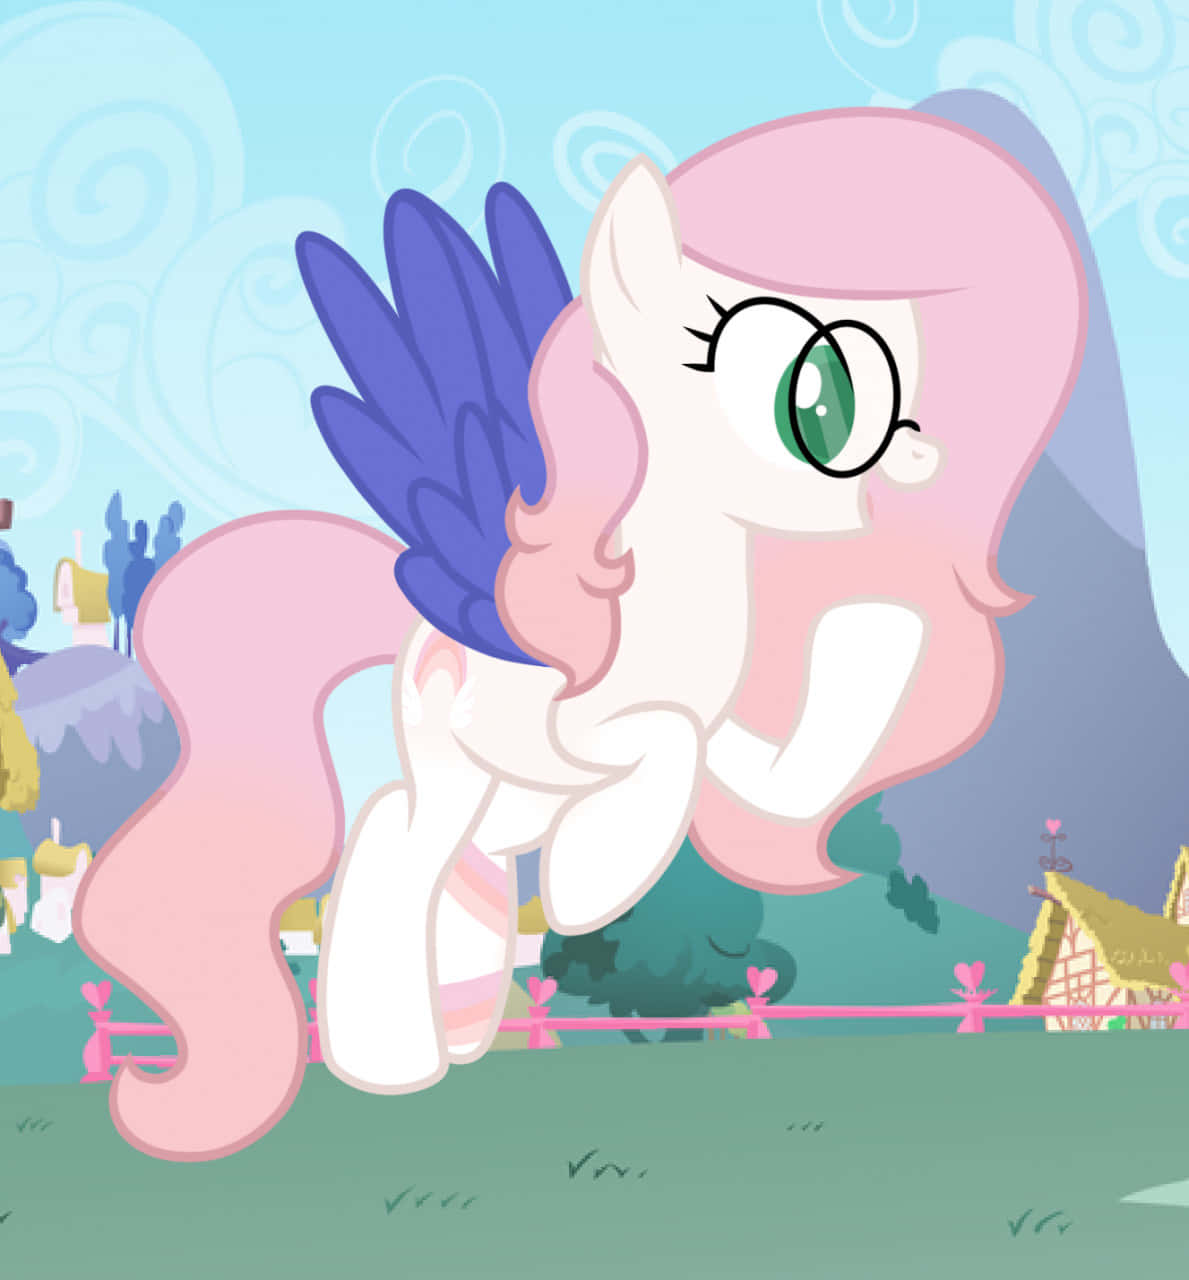 Make calling magical with Mlp Phone!